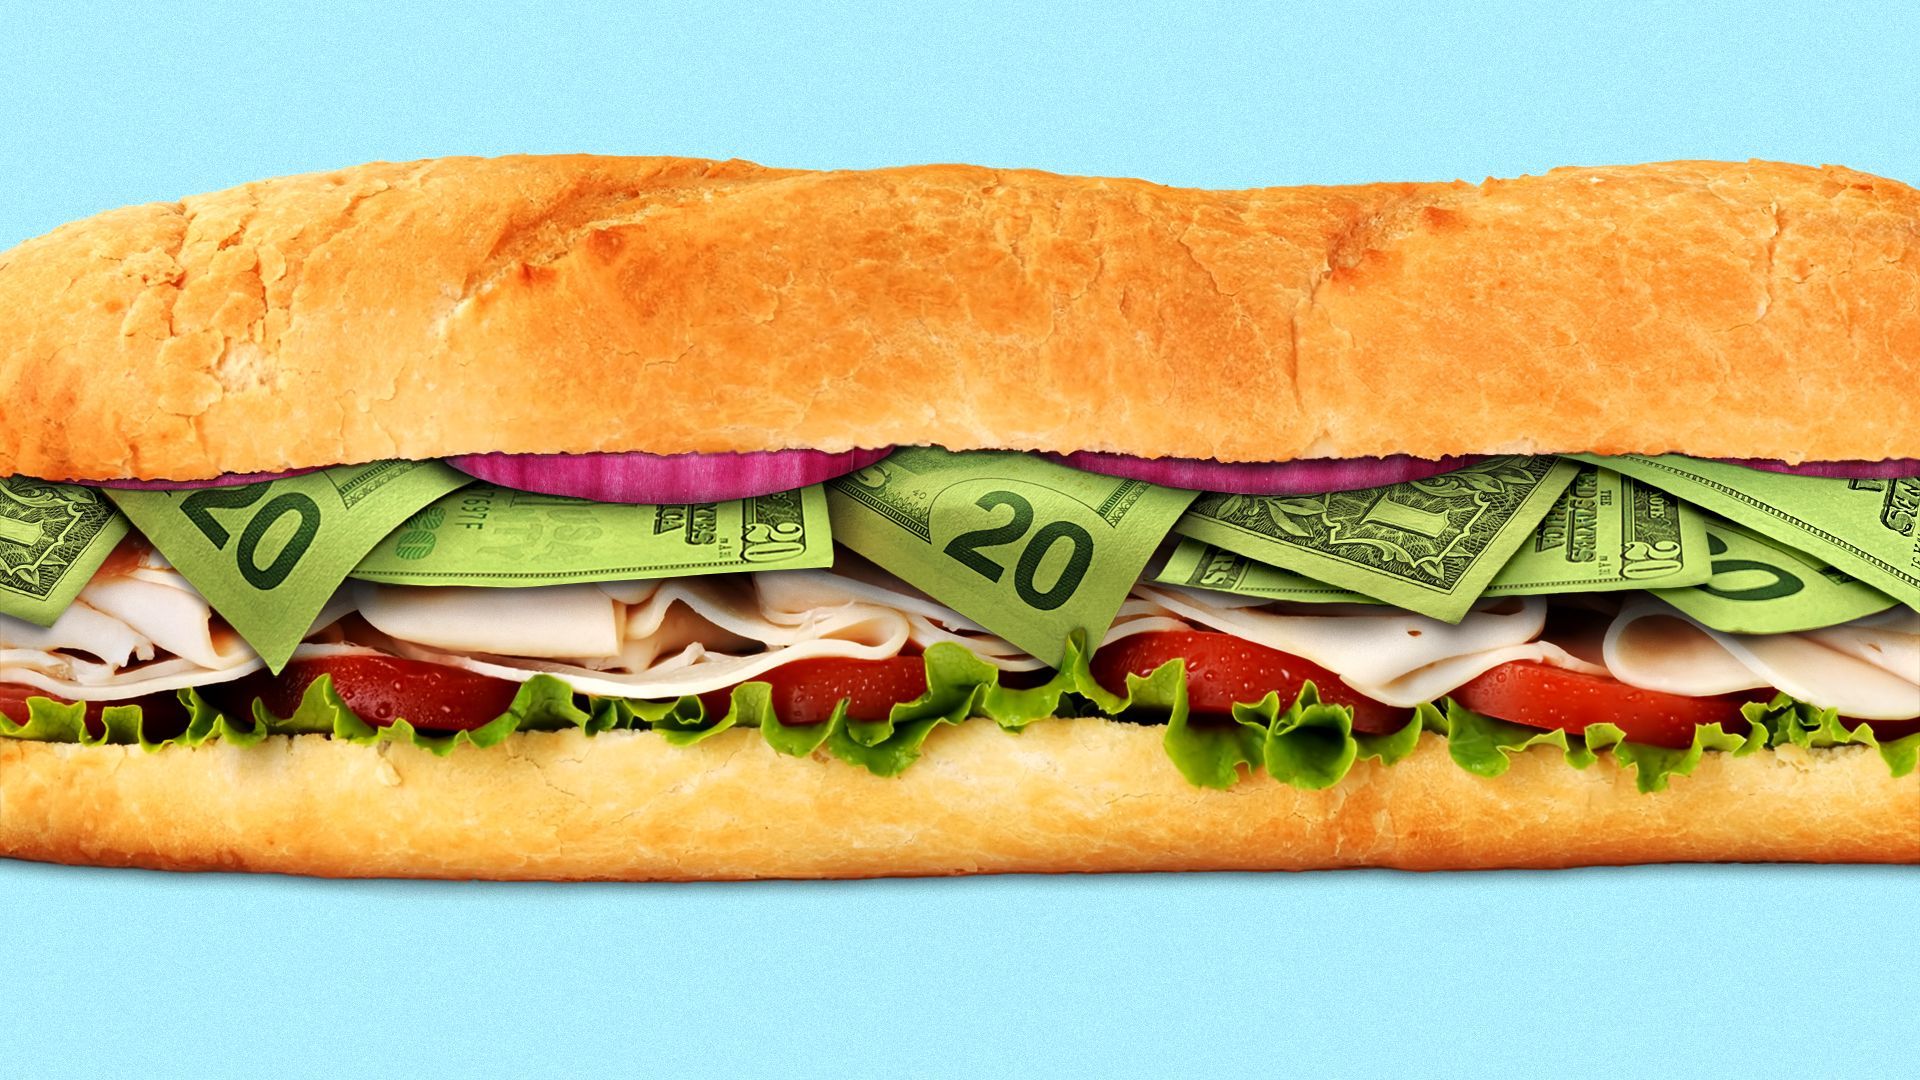 Sandwich chain Subway will be sold to fast-food investor Roark Capital